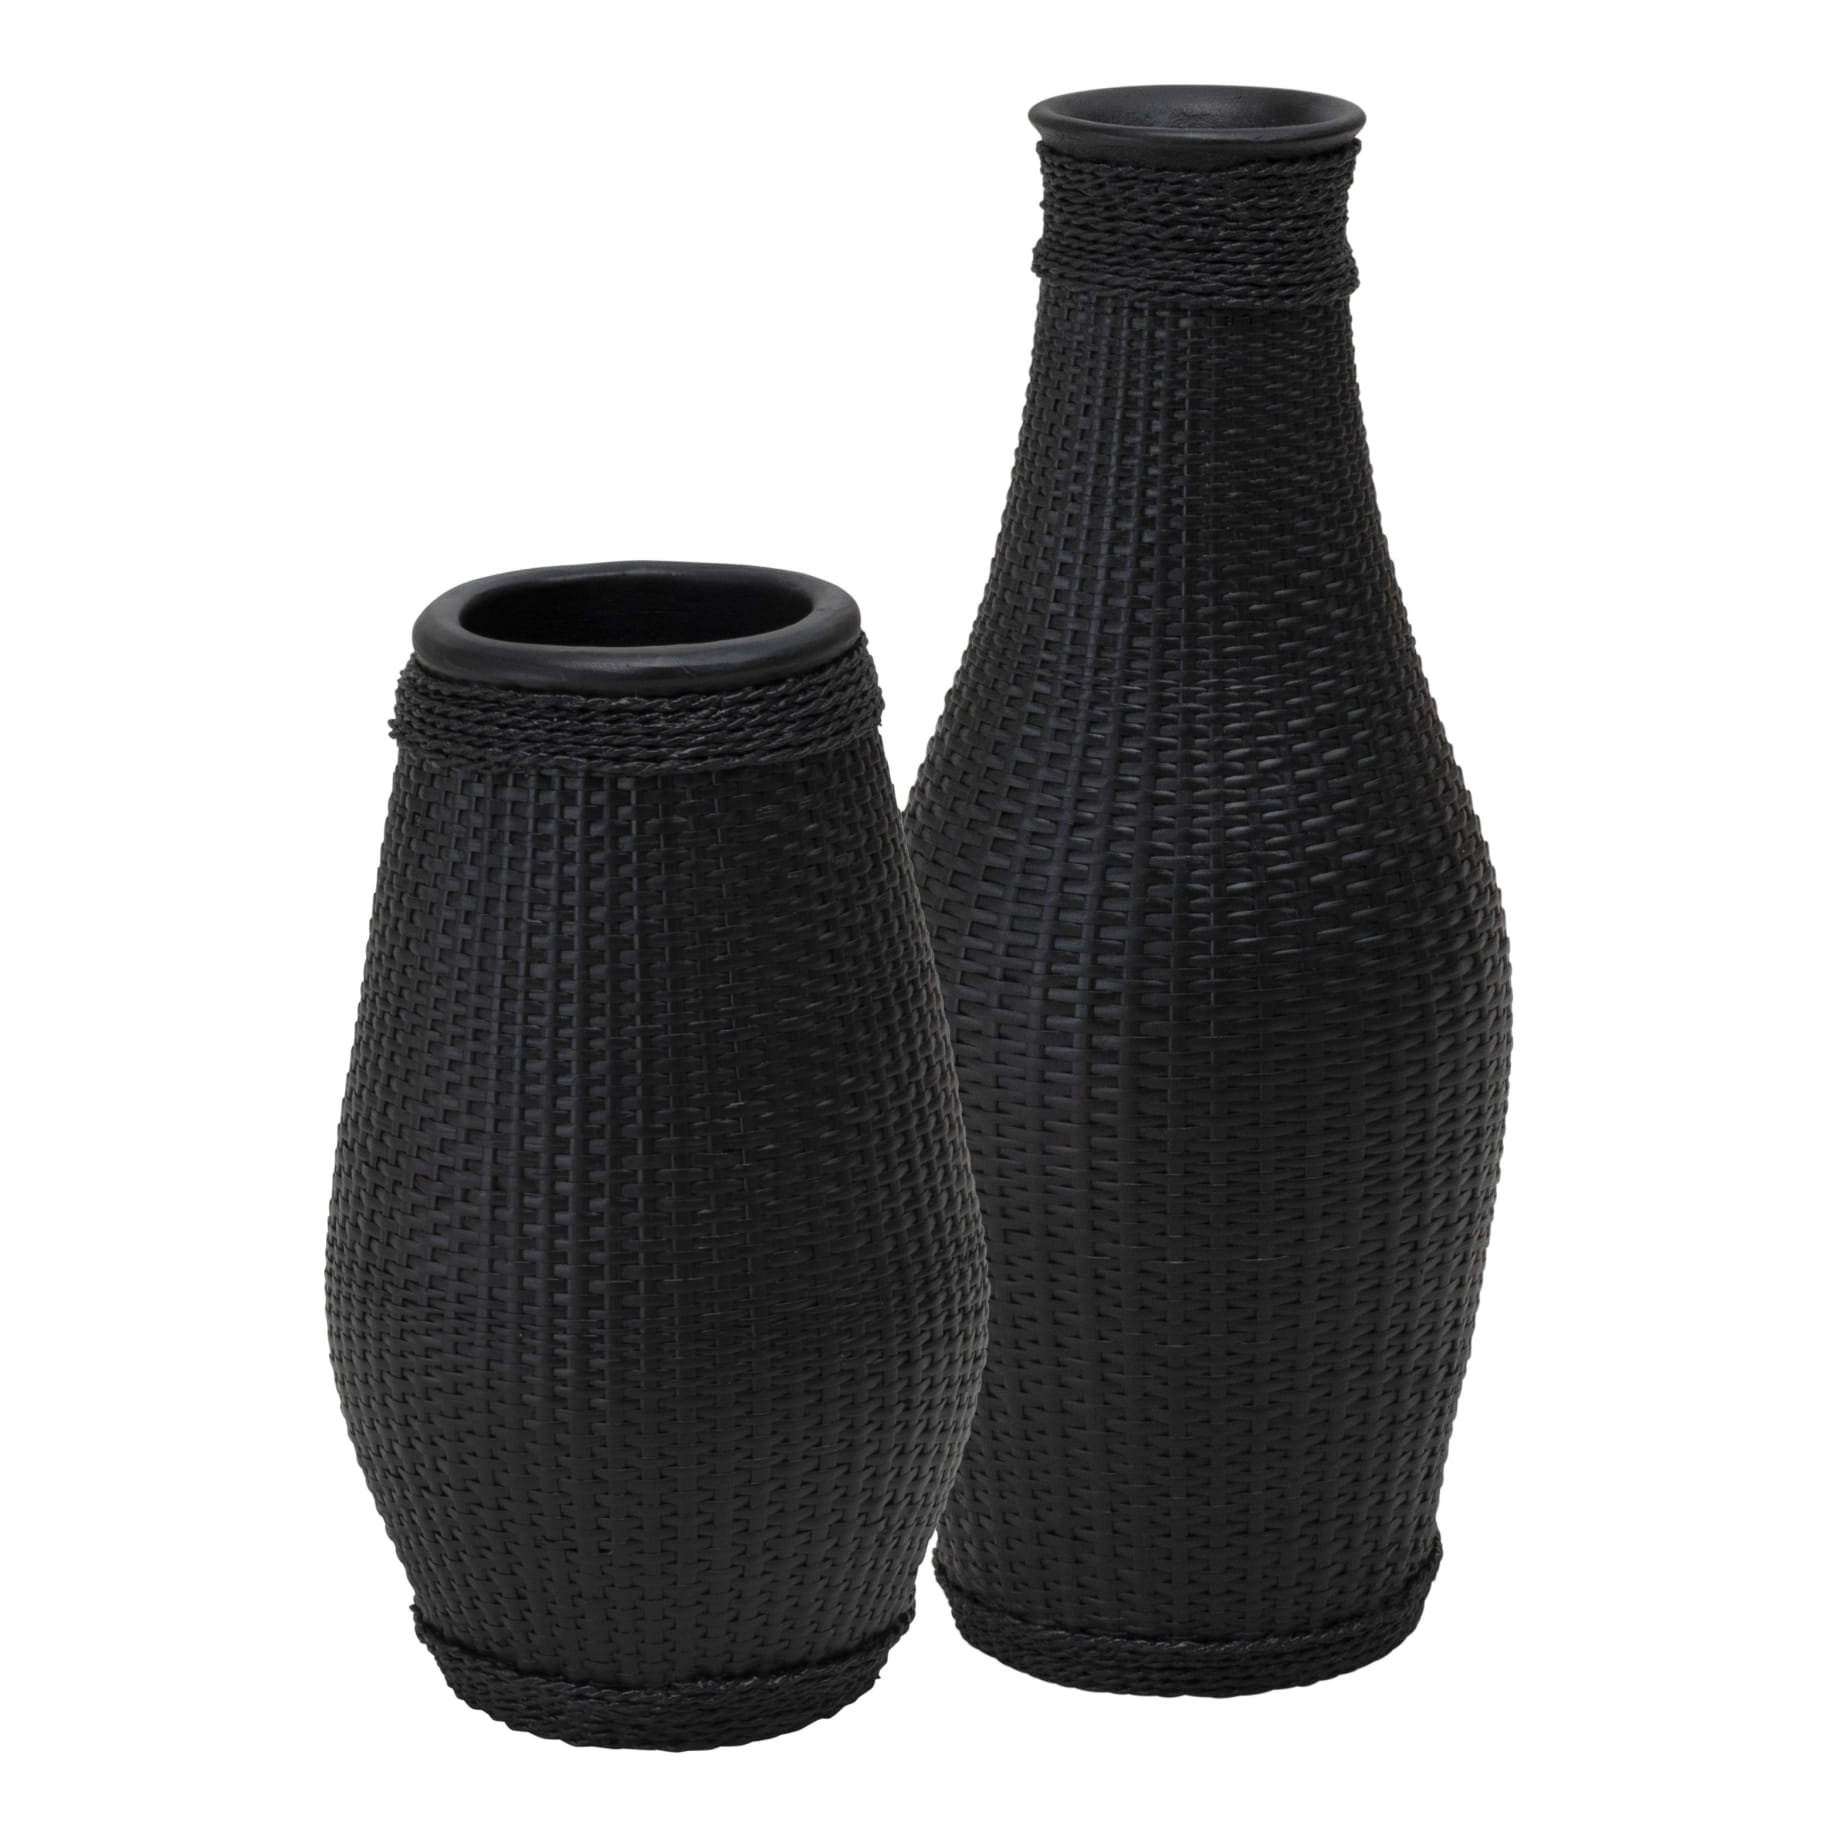 Bamboo Wrap Vessel Set of 2 in Black